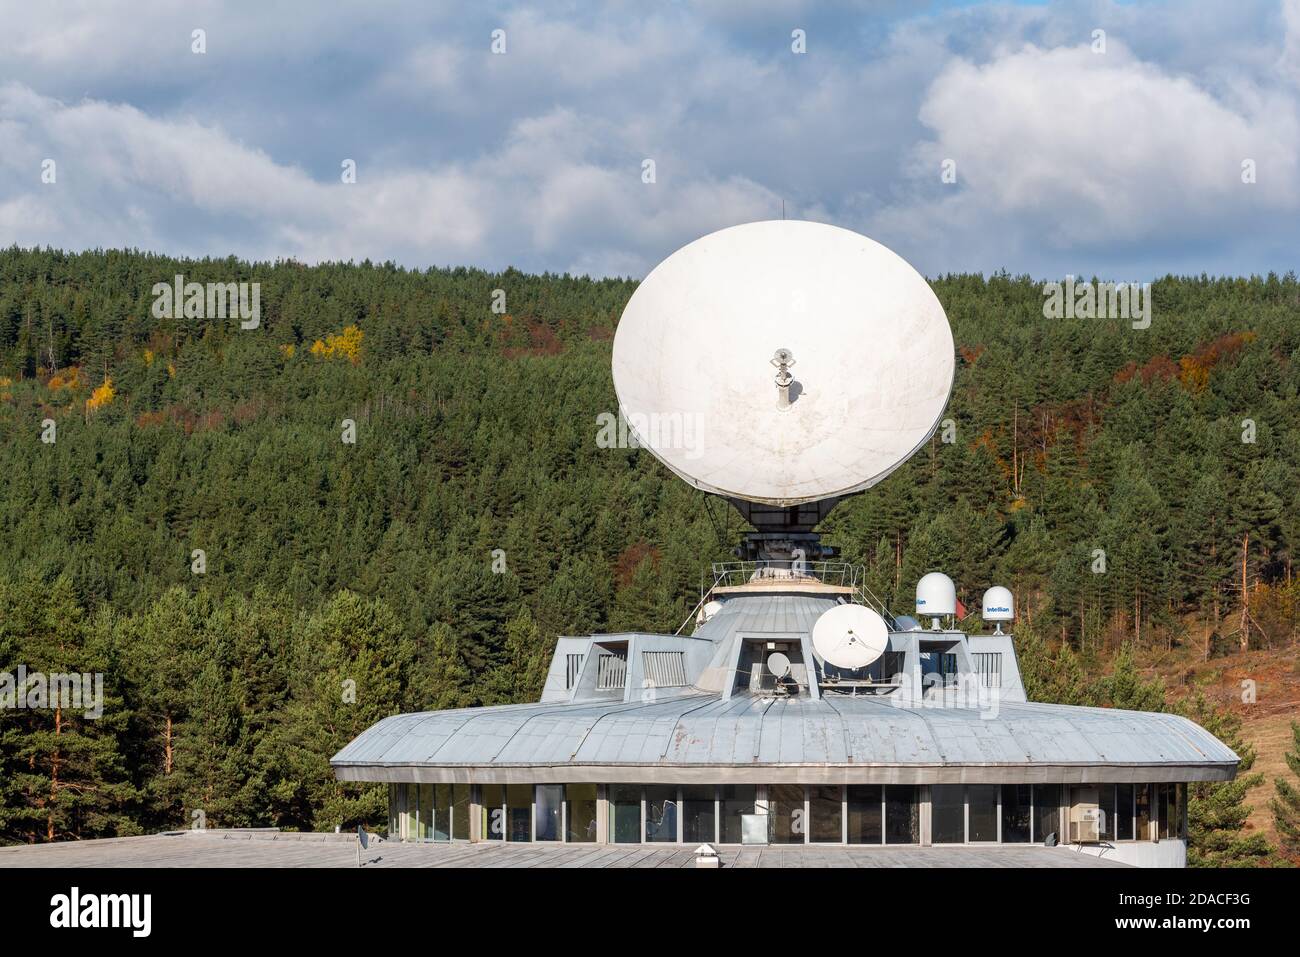 Business electrical dish media satellite space radio high power antenna  against cloudy blue sky forest station hidden Stock Photo - Alamy